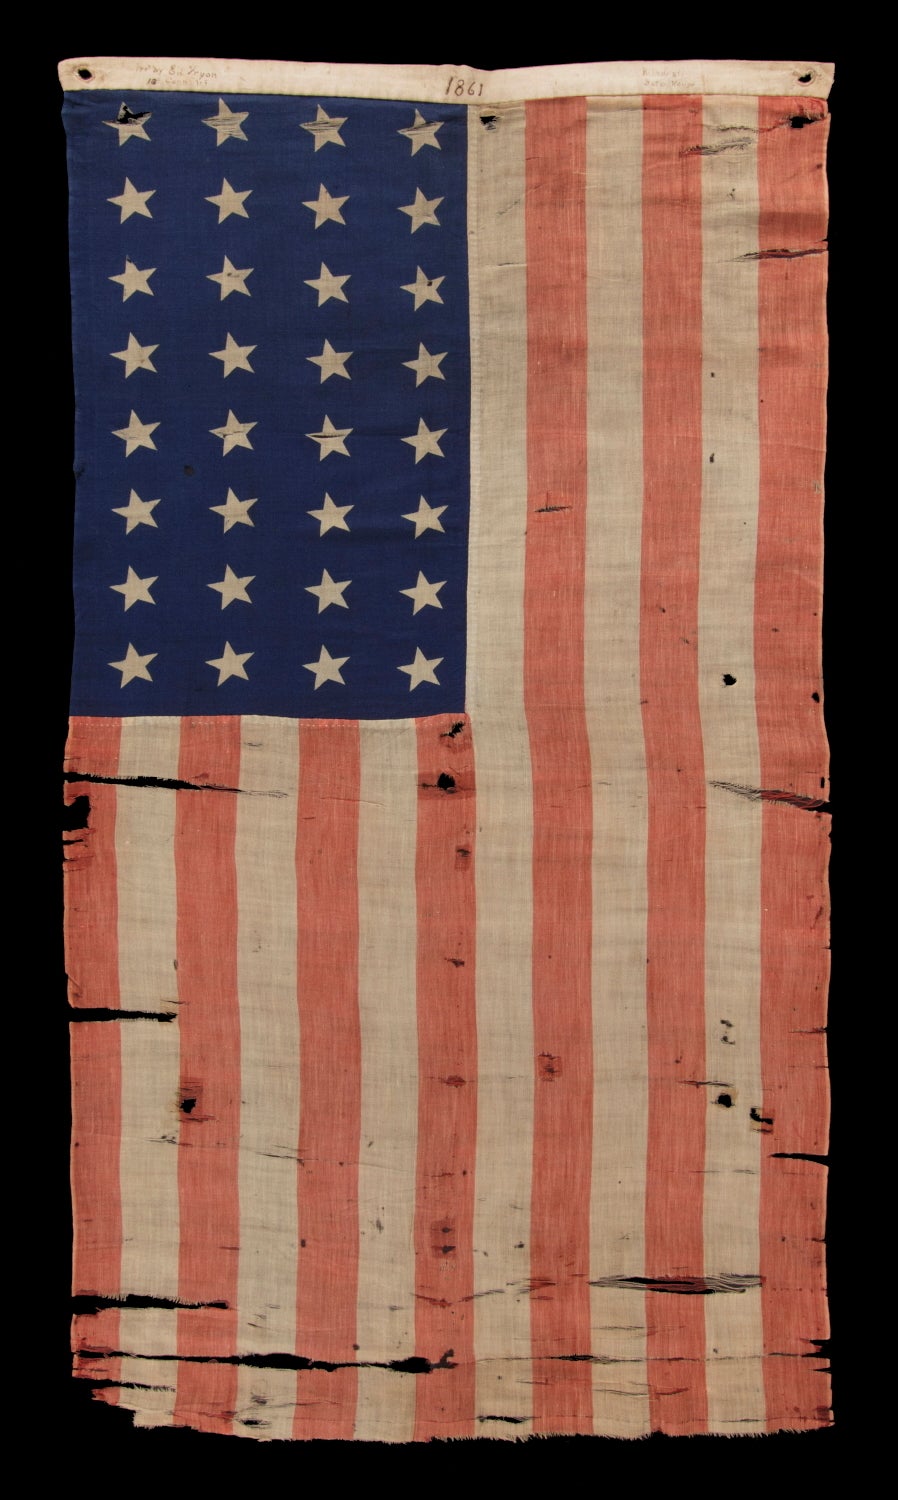 32 STARS (MINNESOTA STATEHOOD), 1858-59, PRESENTED BY A CIVIL WAR MUSICIAN WITH THE 13TH CONNECTICUT INFANTRY, AN UNUSUAL EXAMPLE WITH WOVEN STRIPES AND PRESS-DYED STARS, POSSIBLY MADE IN NEW YORK BY THE ANNIN COMPANY:

32 star American flags are